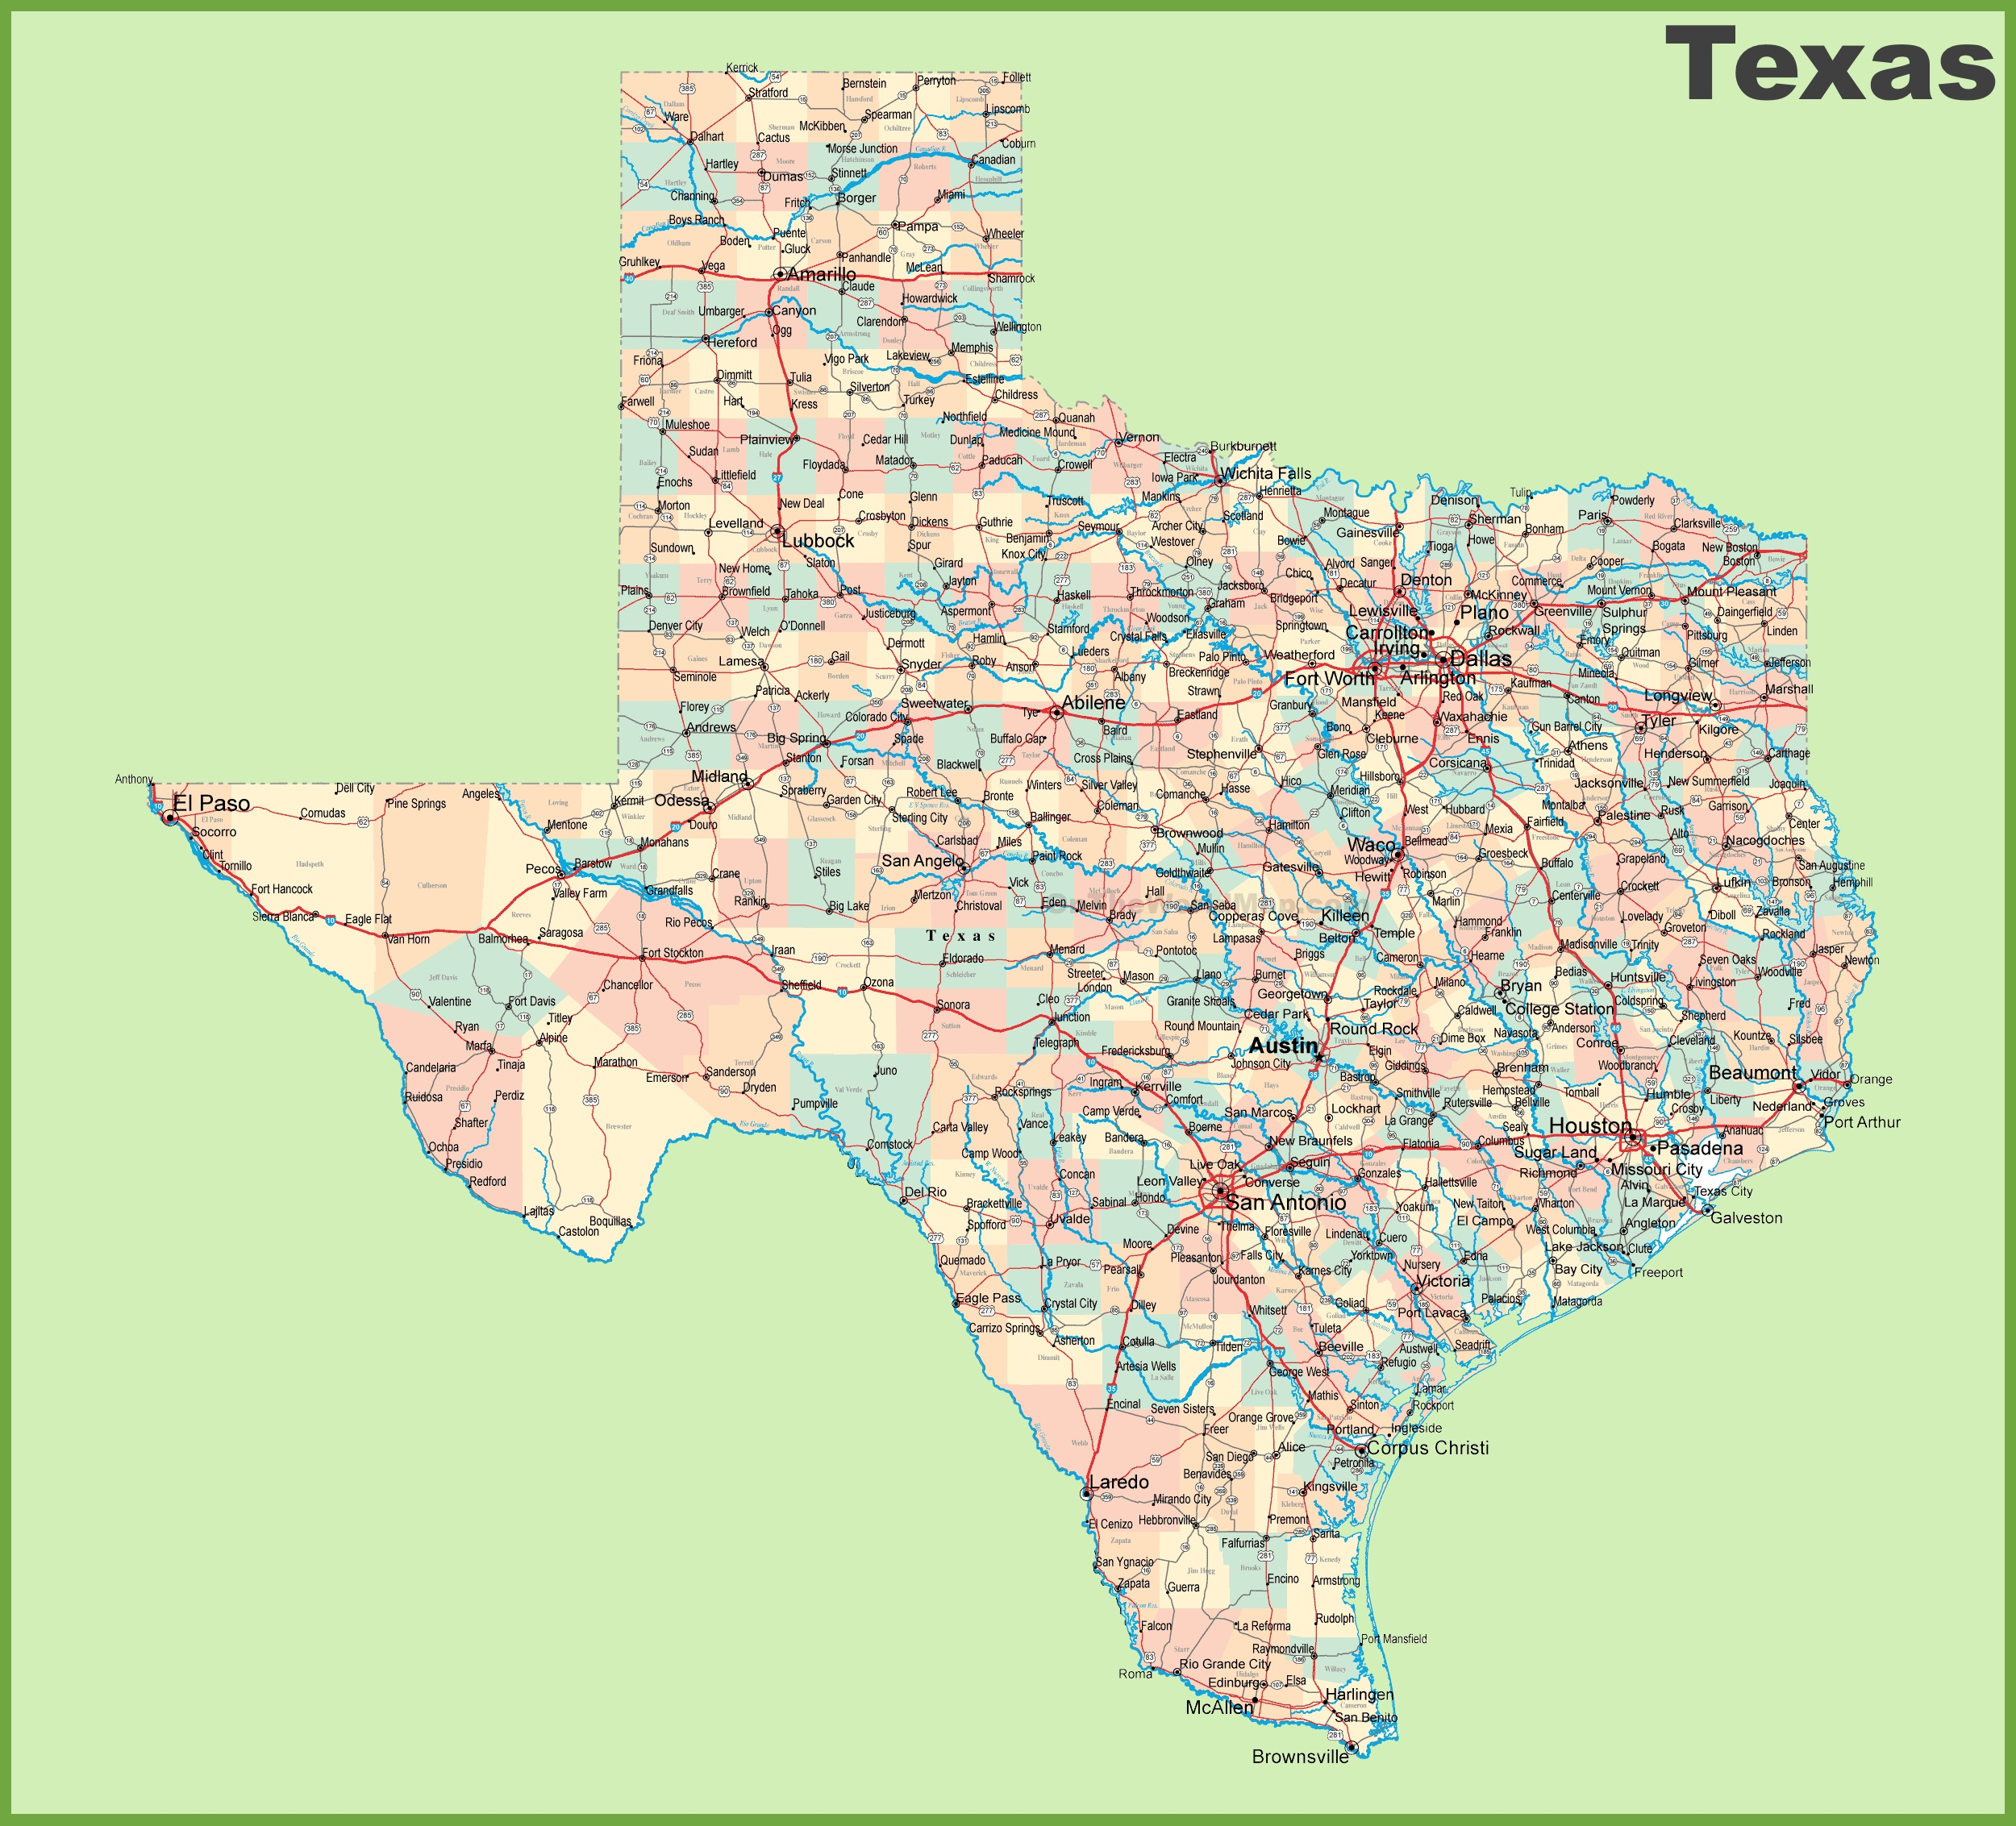 Road Map Of Texas With Cities - Texas Road Map With Cities And Towns